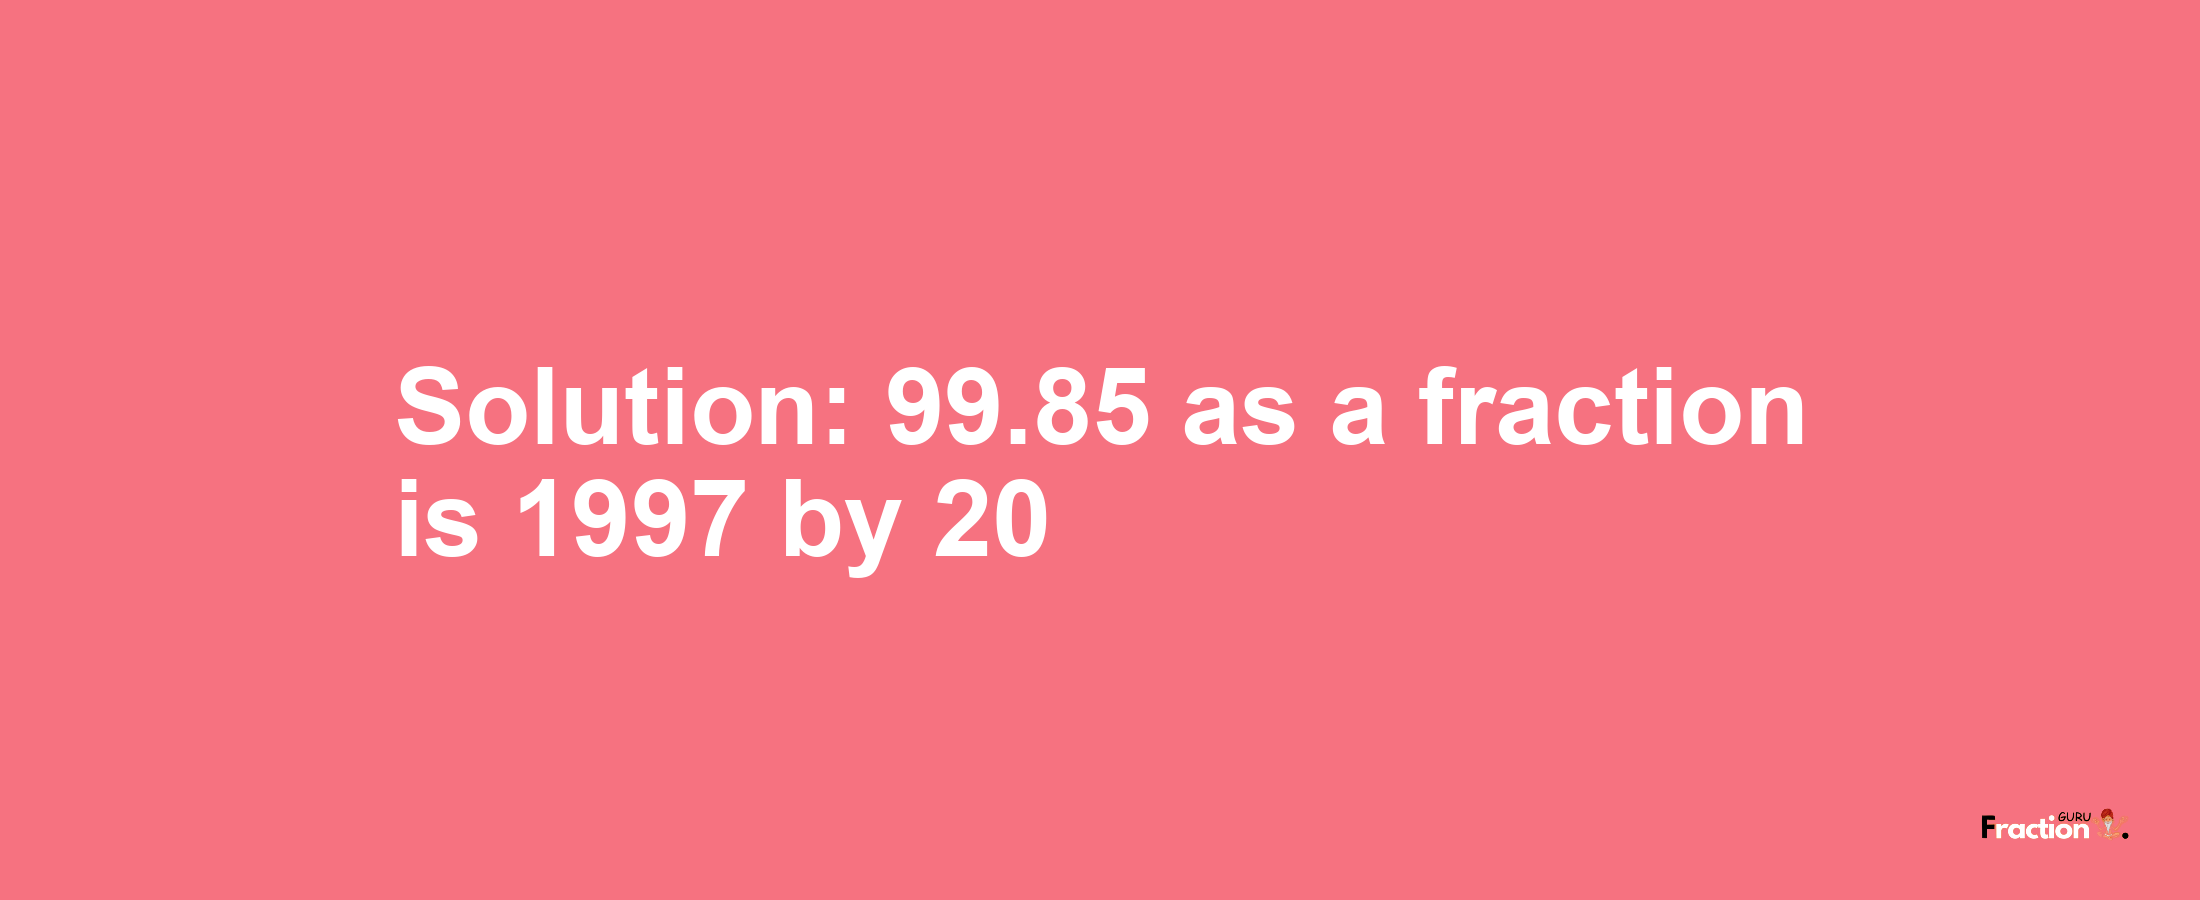 Solution:99.85 as a fraction is 1997/20